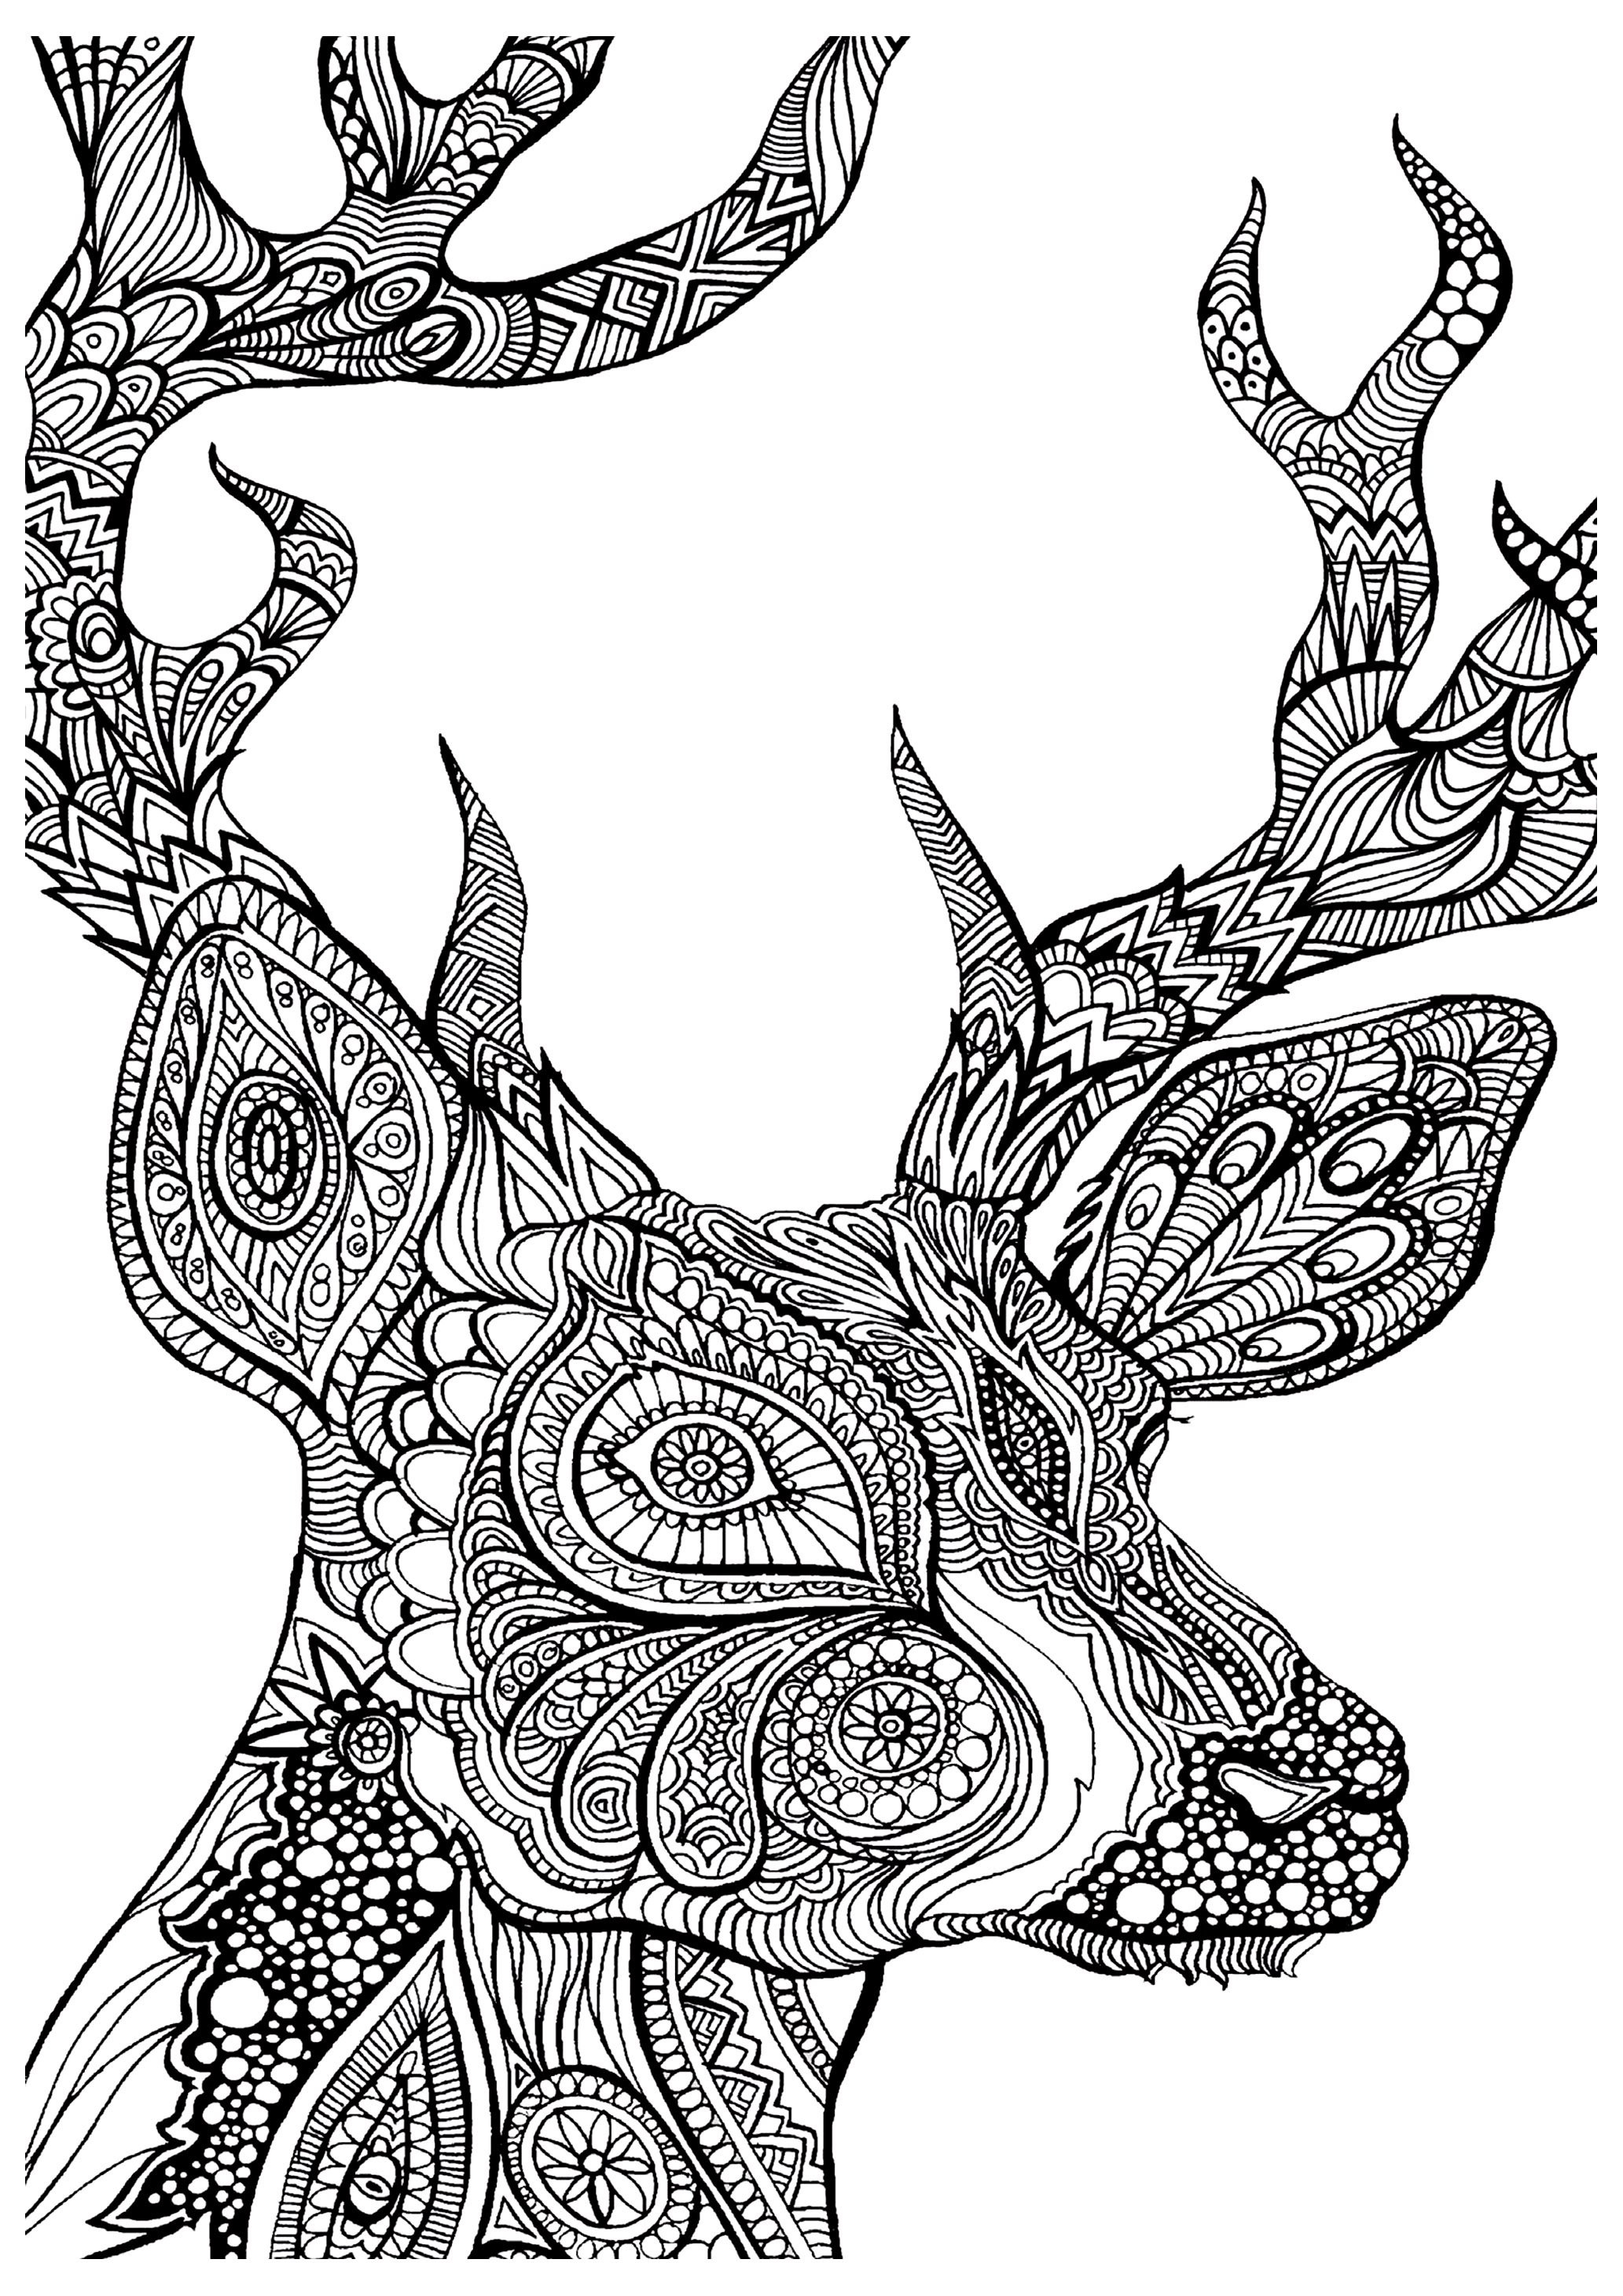 Coloring Pages Adults
 19 of the Best Adult Colouring Pages Free Printables for